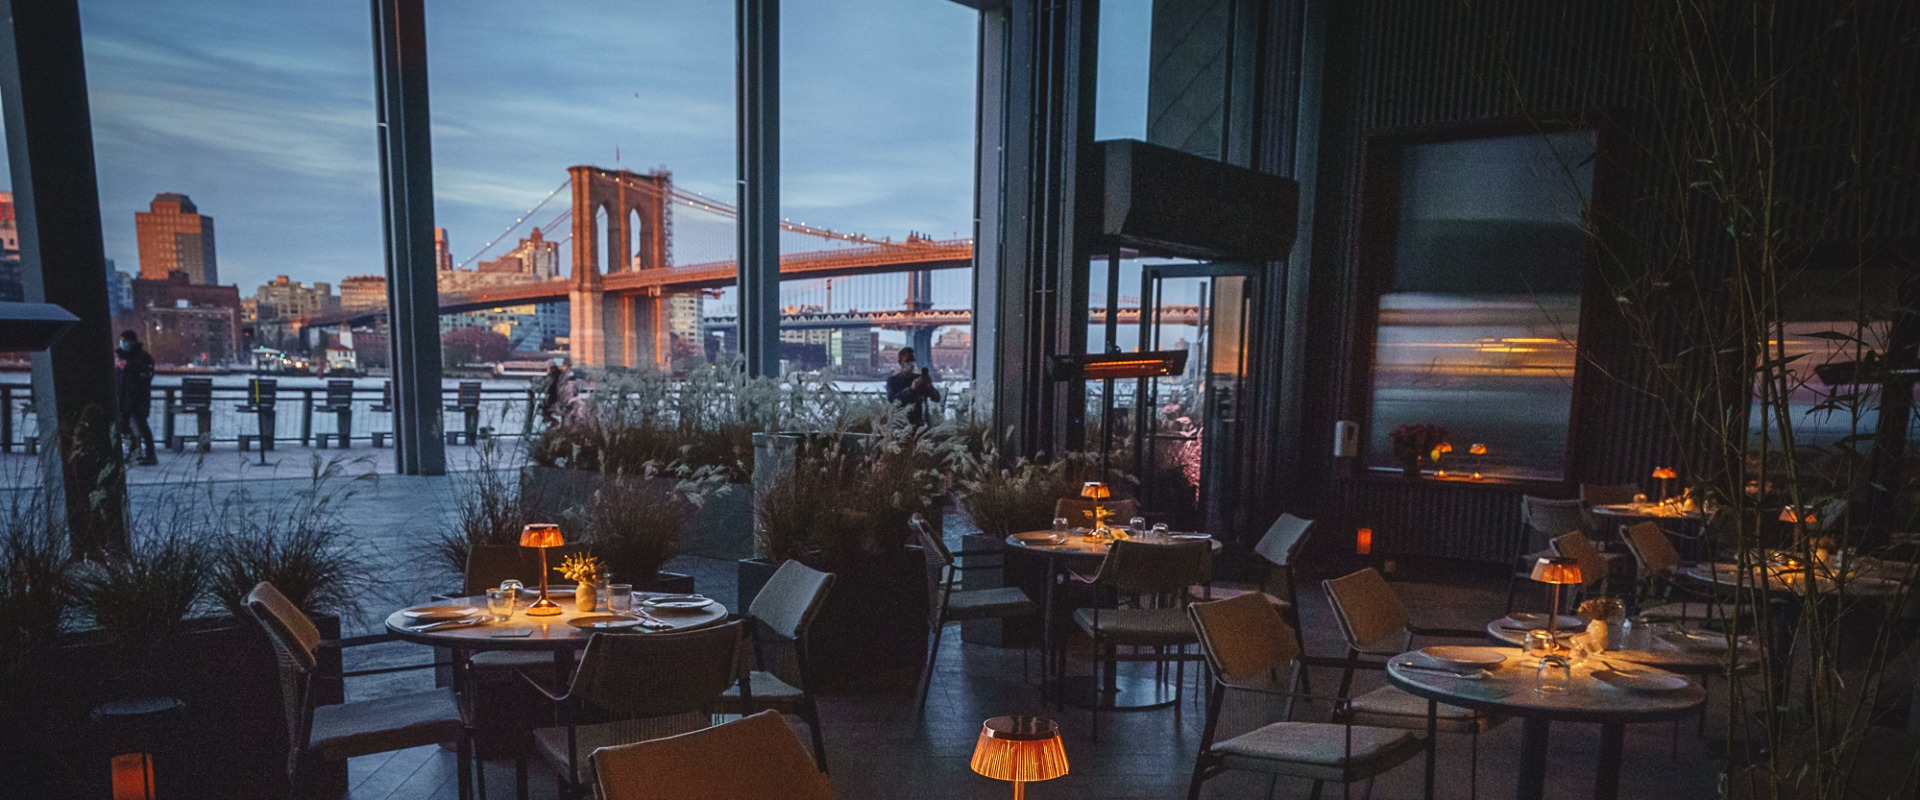 The Best Eateries in Brooklyn, New York with Stunning Views